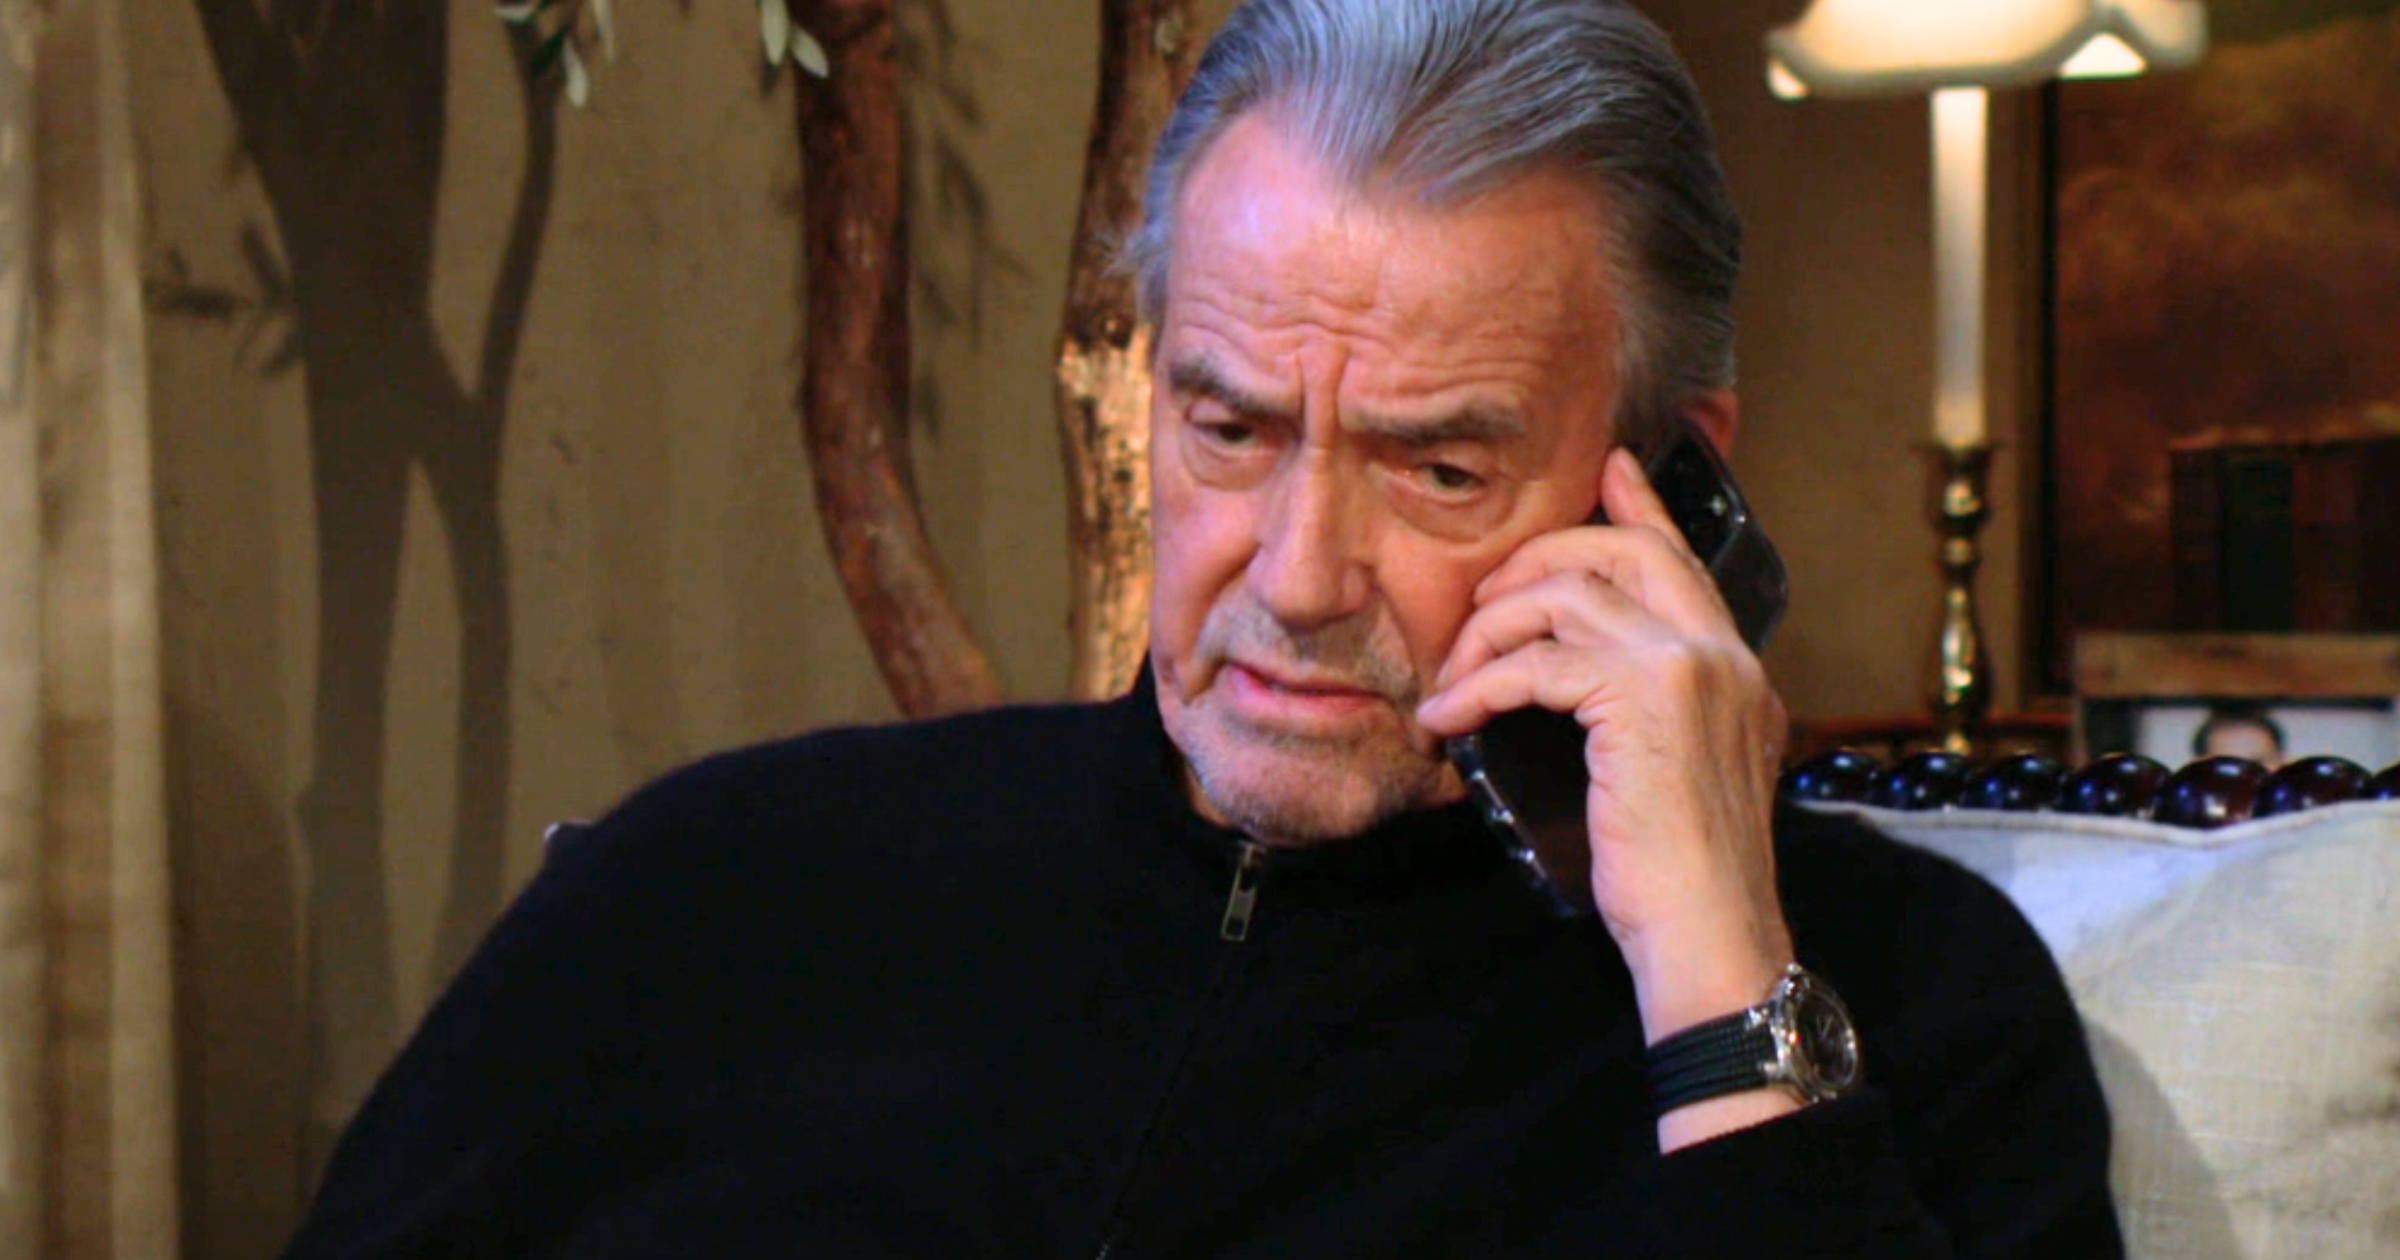 The Young and the Restless - Oct 26 - Victor